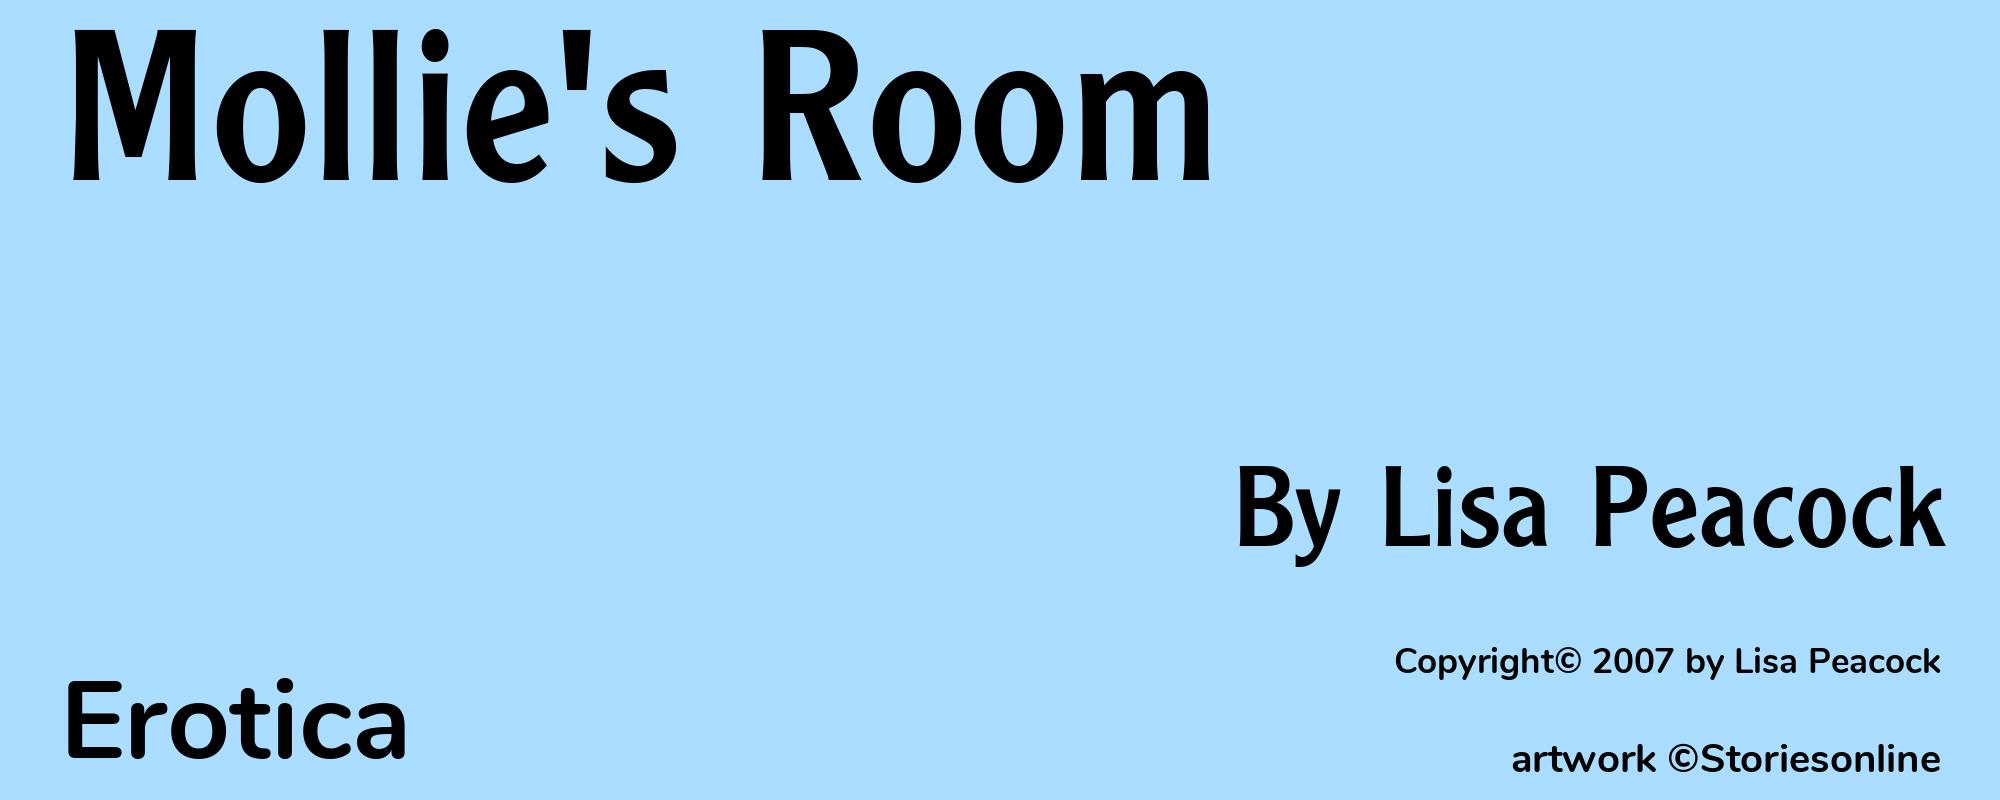 Mollie's Room - Cover